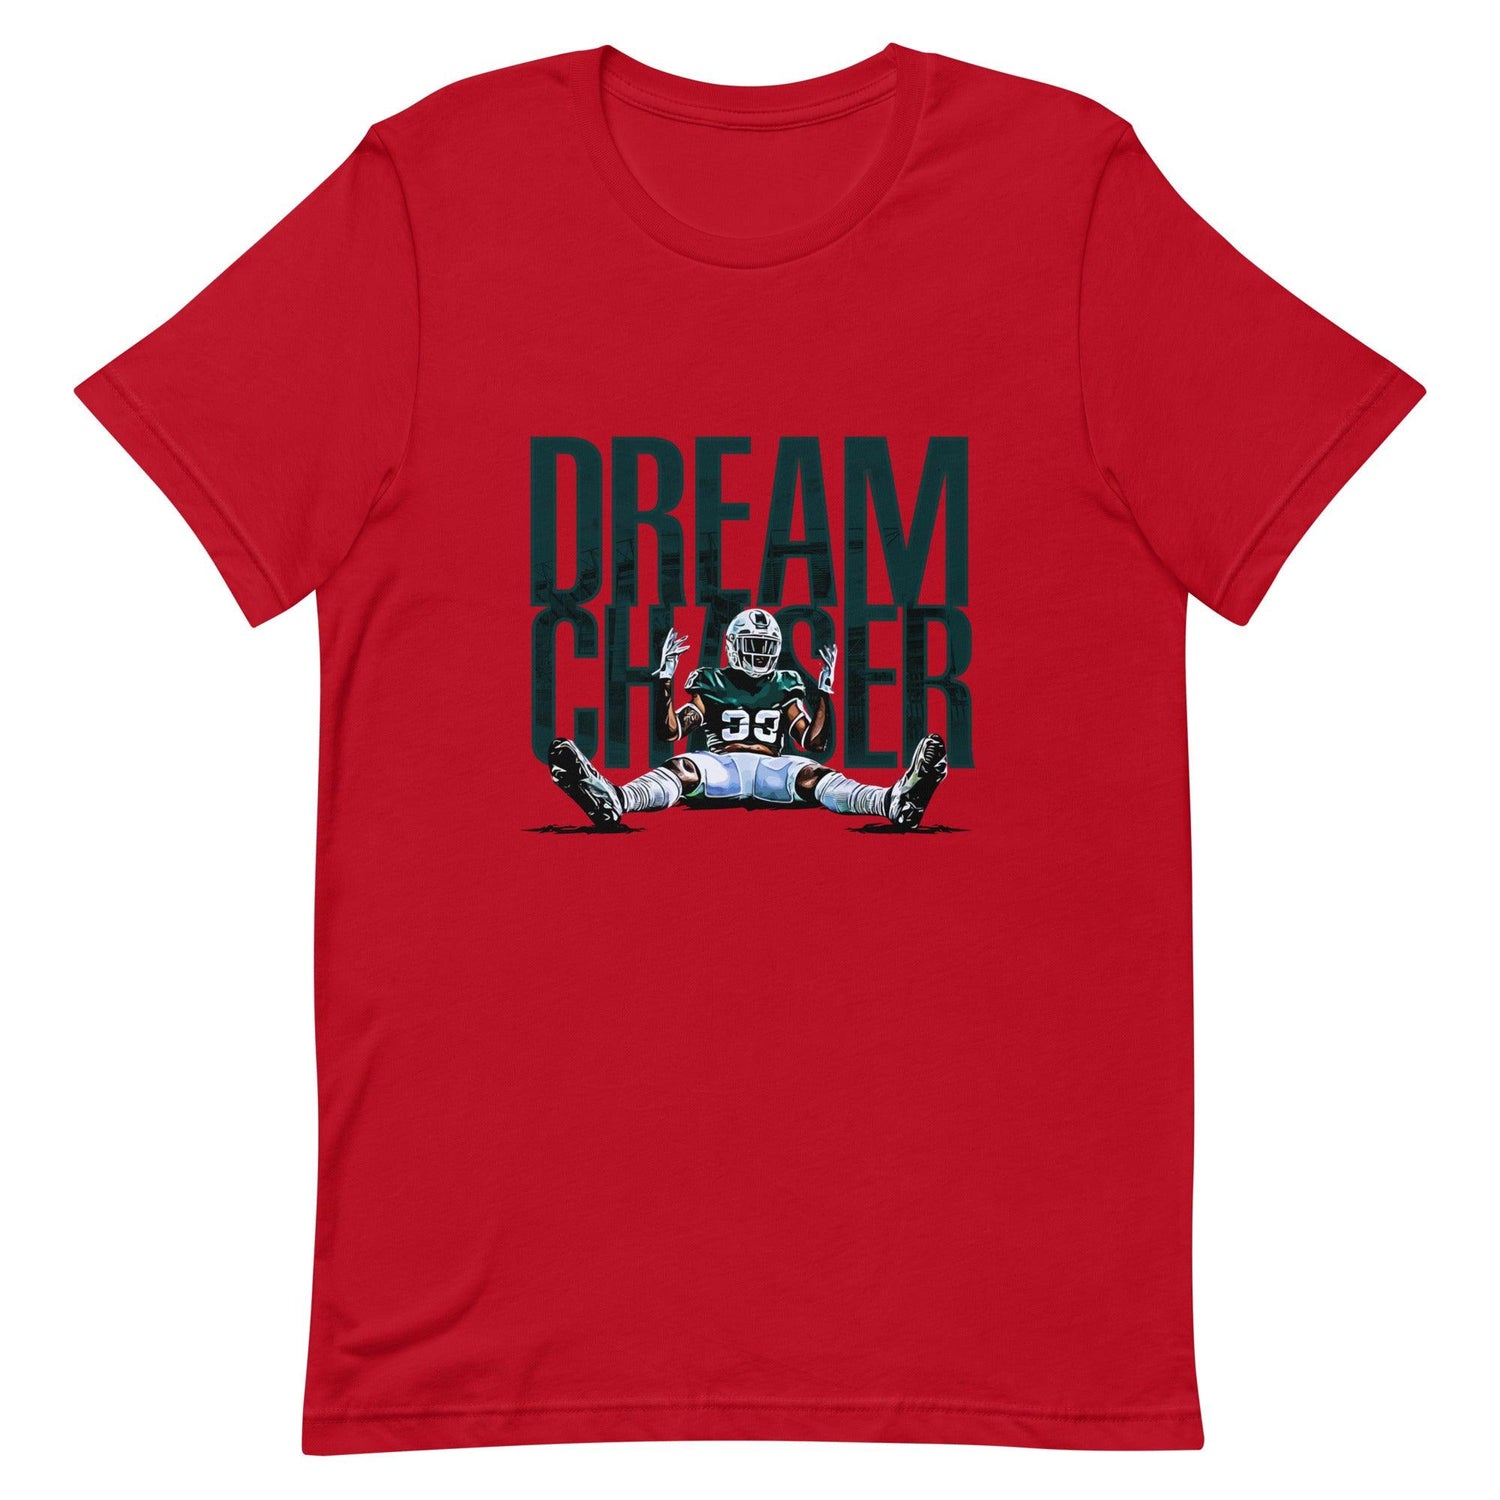 Kendell Brooks "Dream Chaser" t-shirt - Fan Arch